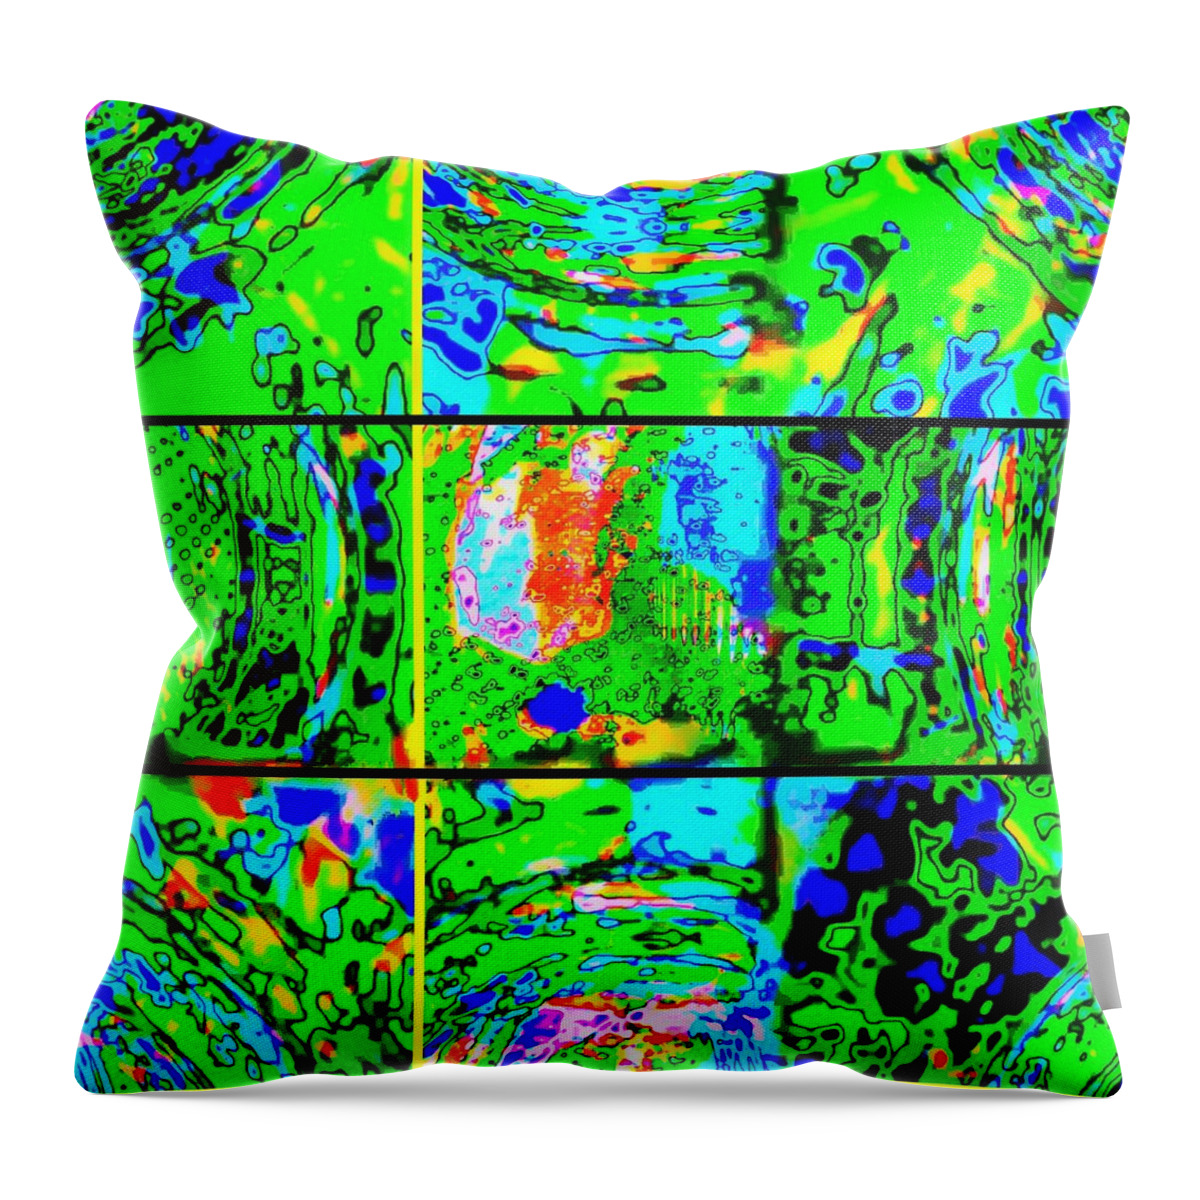 9 Coasters Throw Pillow featuring the digital art 9 Coasters by Scott S Baker